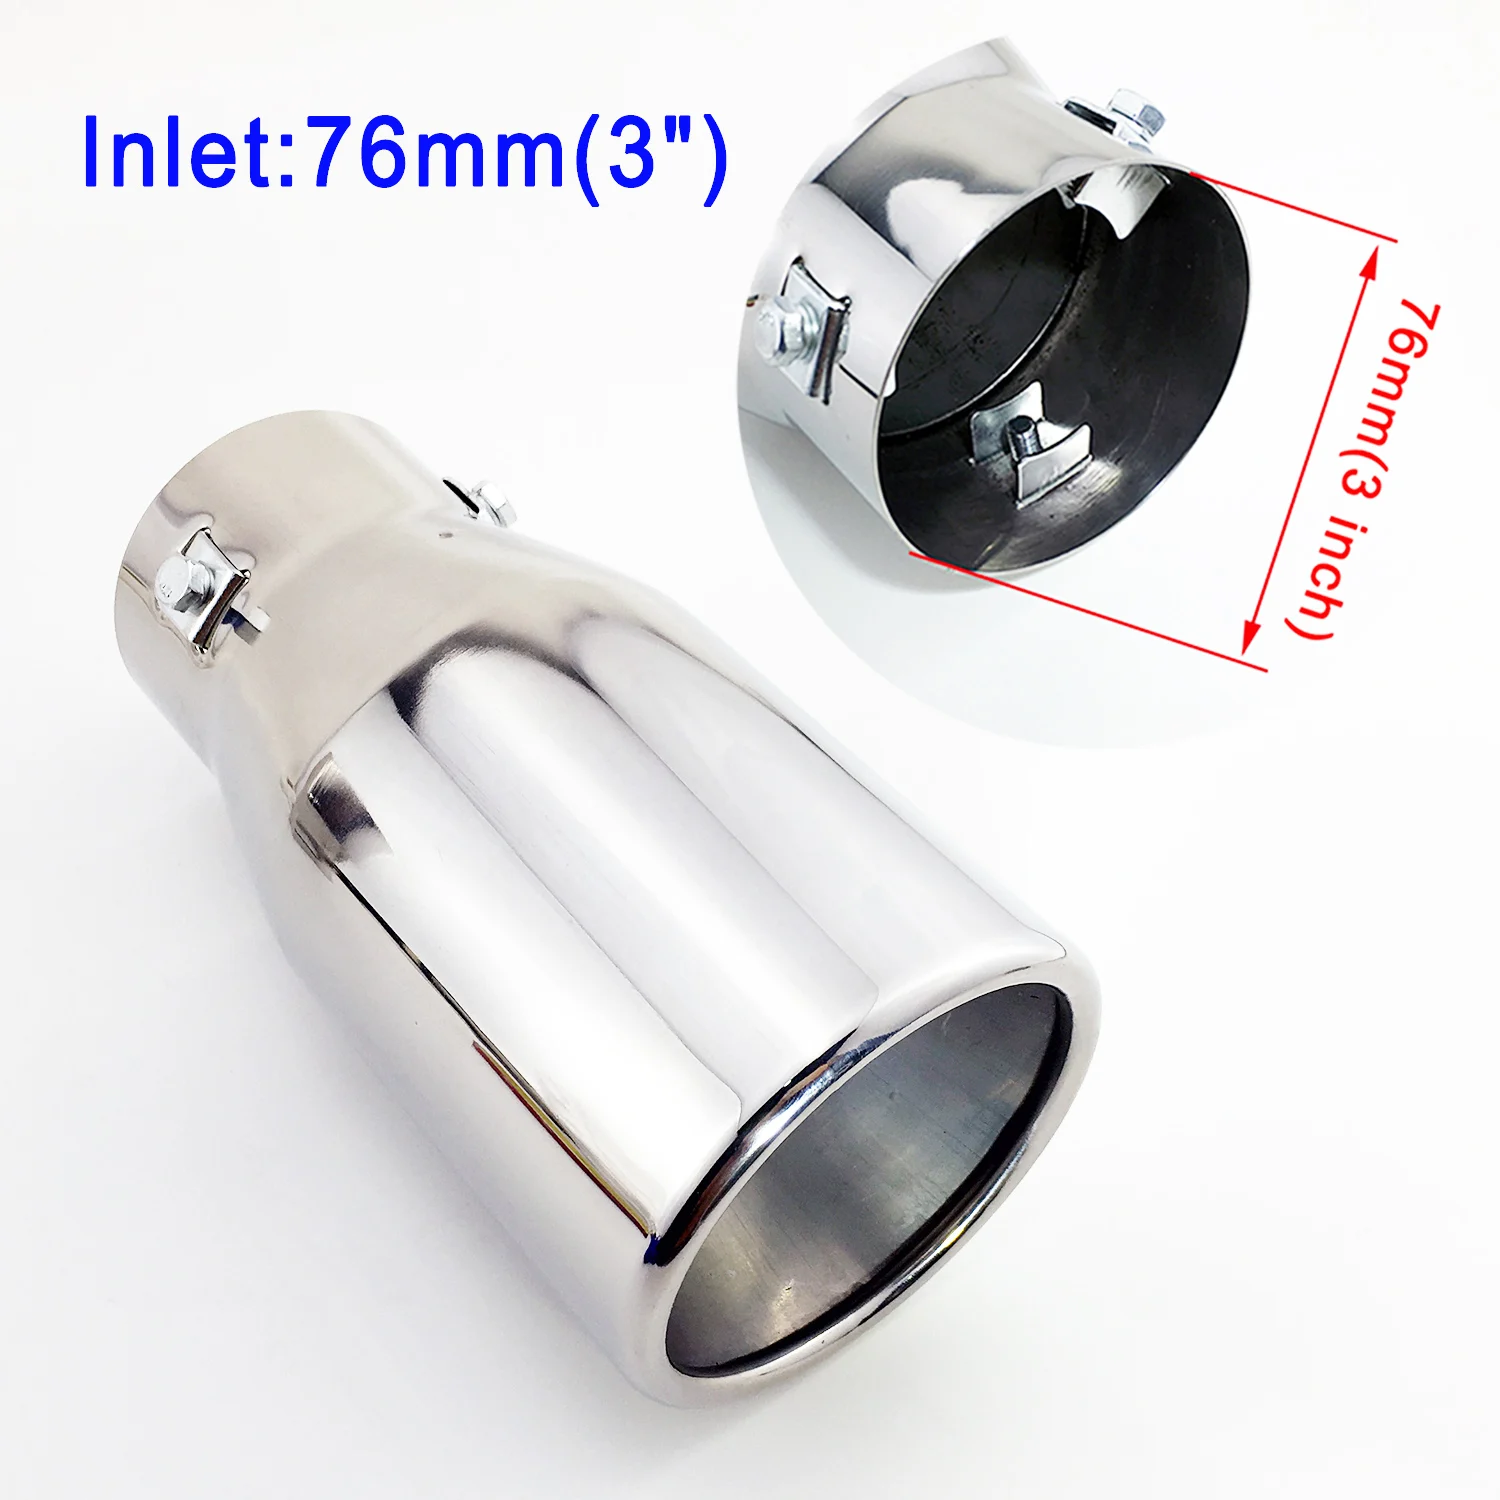 

Chrome Car Tail Exhaust Muffler Rear Pipe Tip Cover 3" 76mm Inlet Auto silencer Cover Exterior Accessories